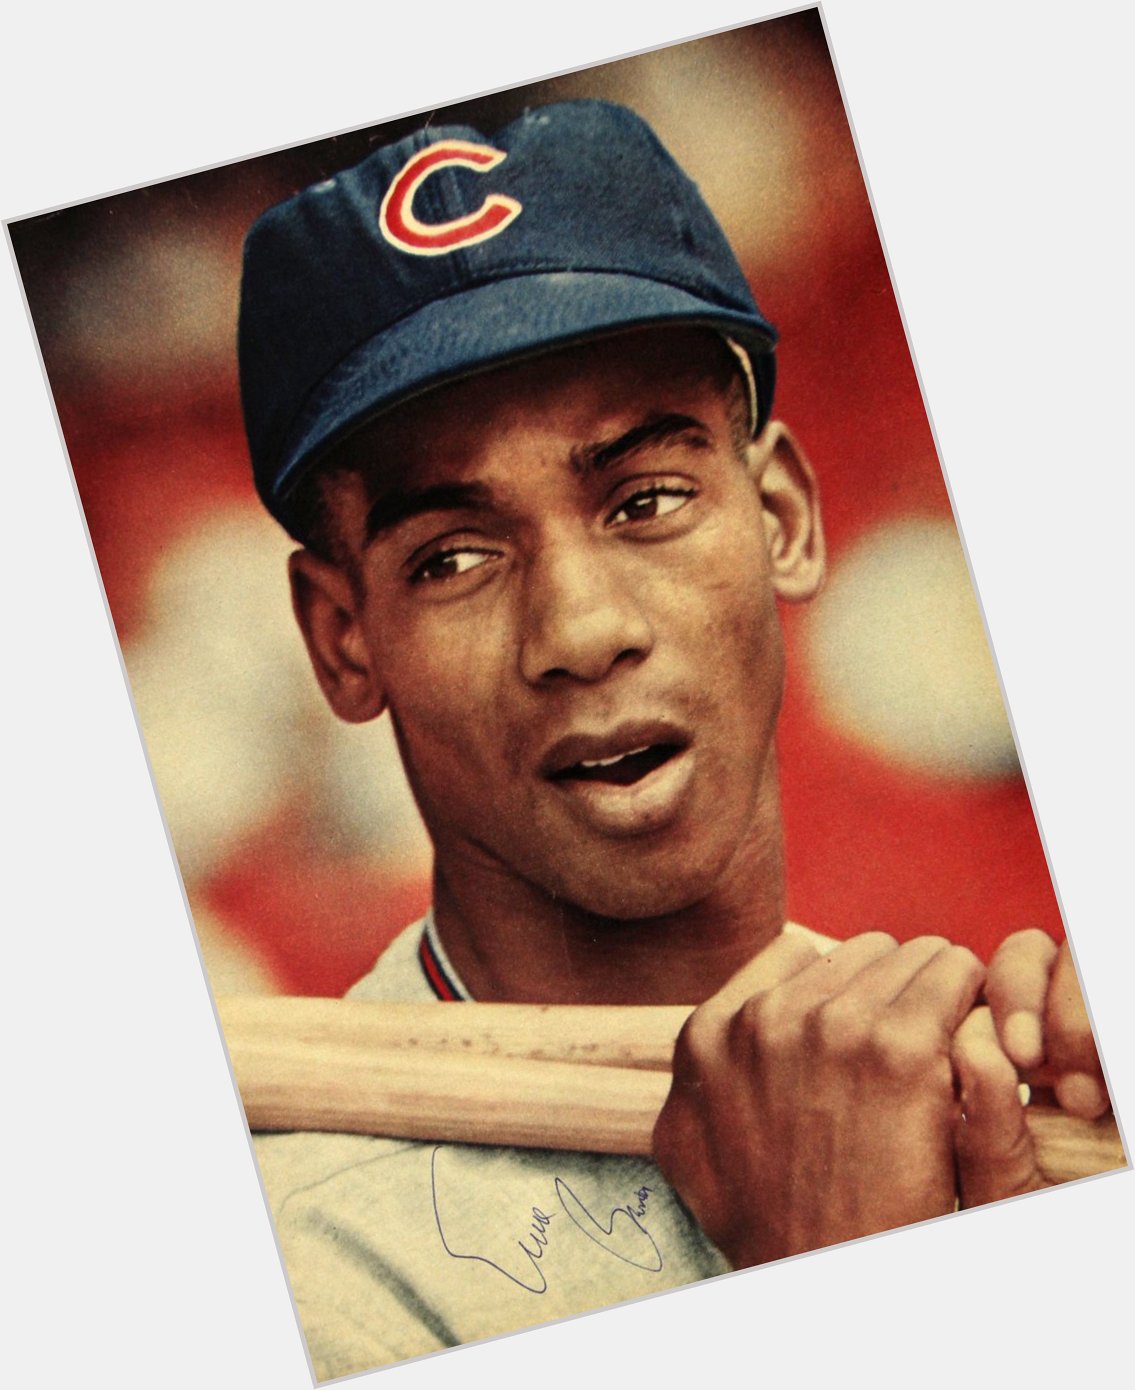 Happy Birthday to our forever Mr. Cub, Ernie Banks! 